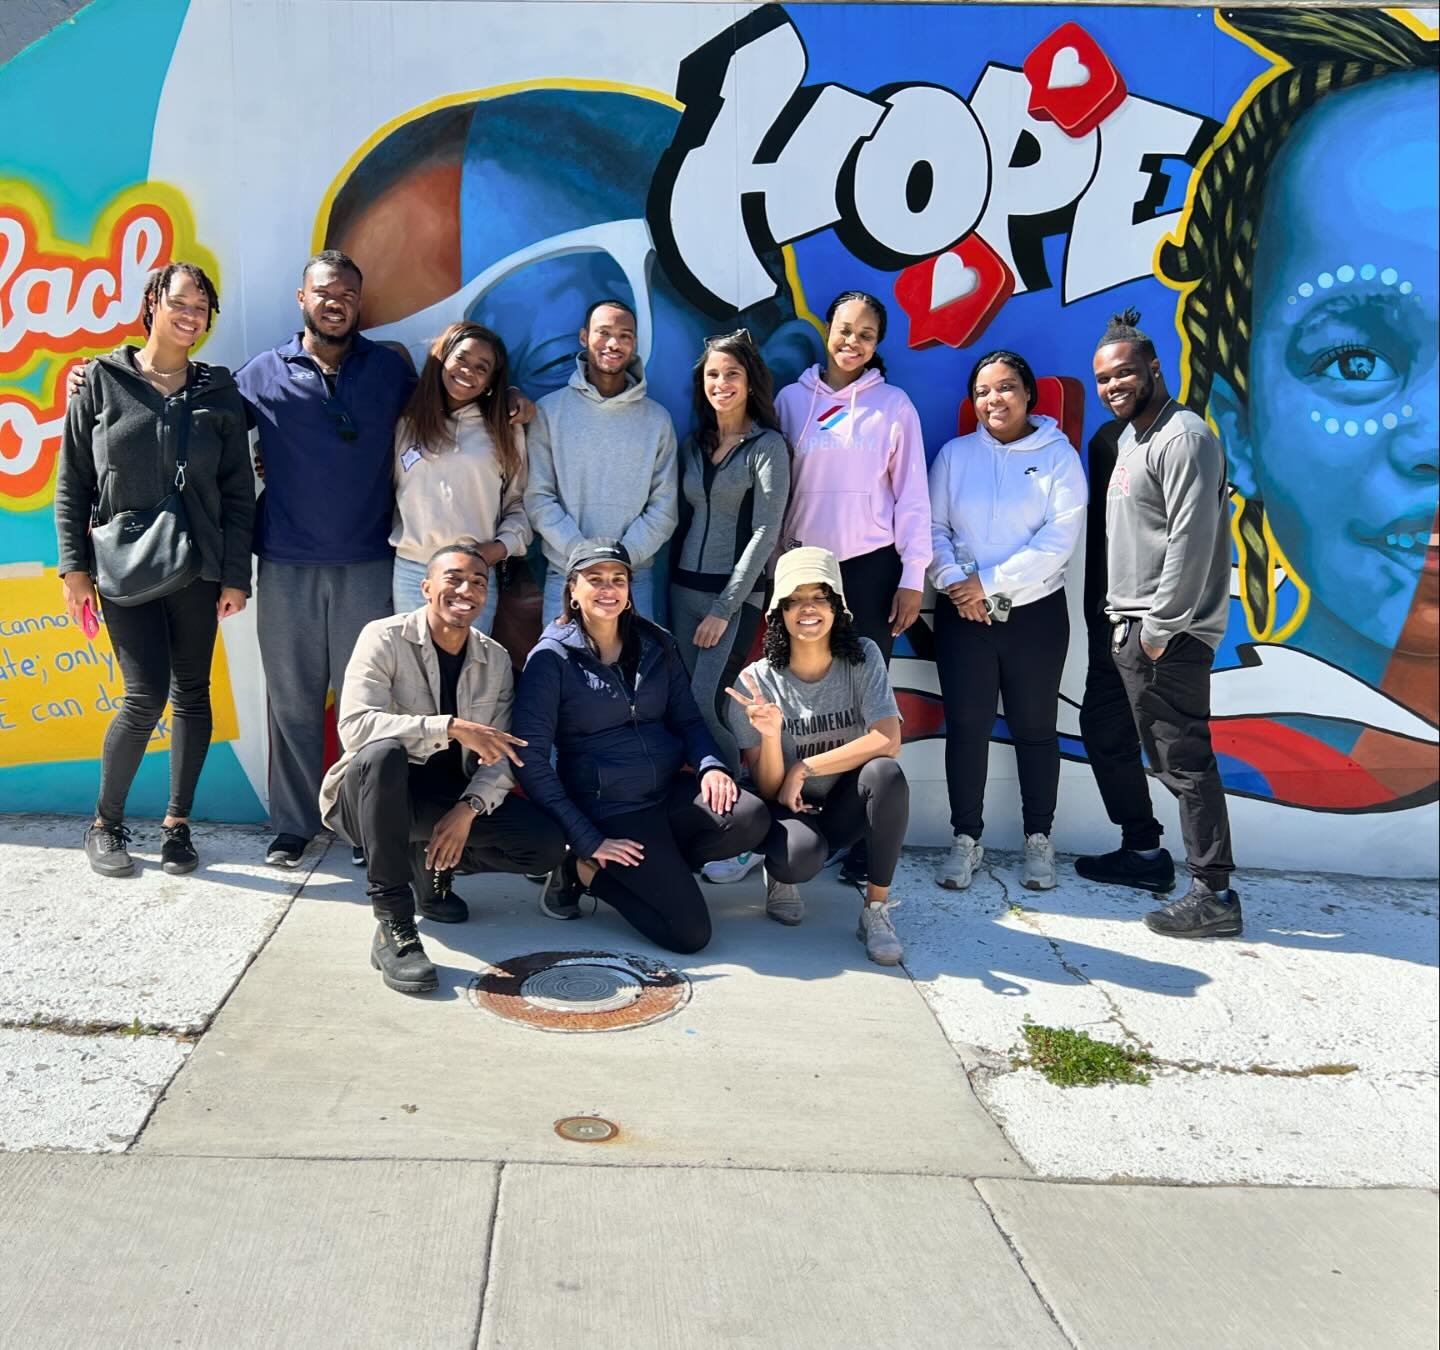 Thank you to all who represented the Congressional Black Associates at the community cleanup with Horton&rsquo;s Kids!

Members spent time working alongside kids, community members, and staff picking up trash and completing a beautification project.